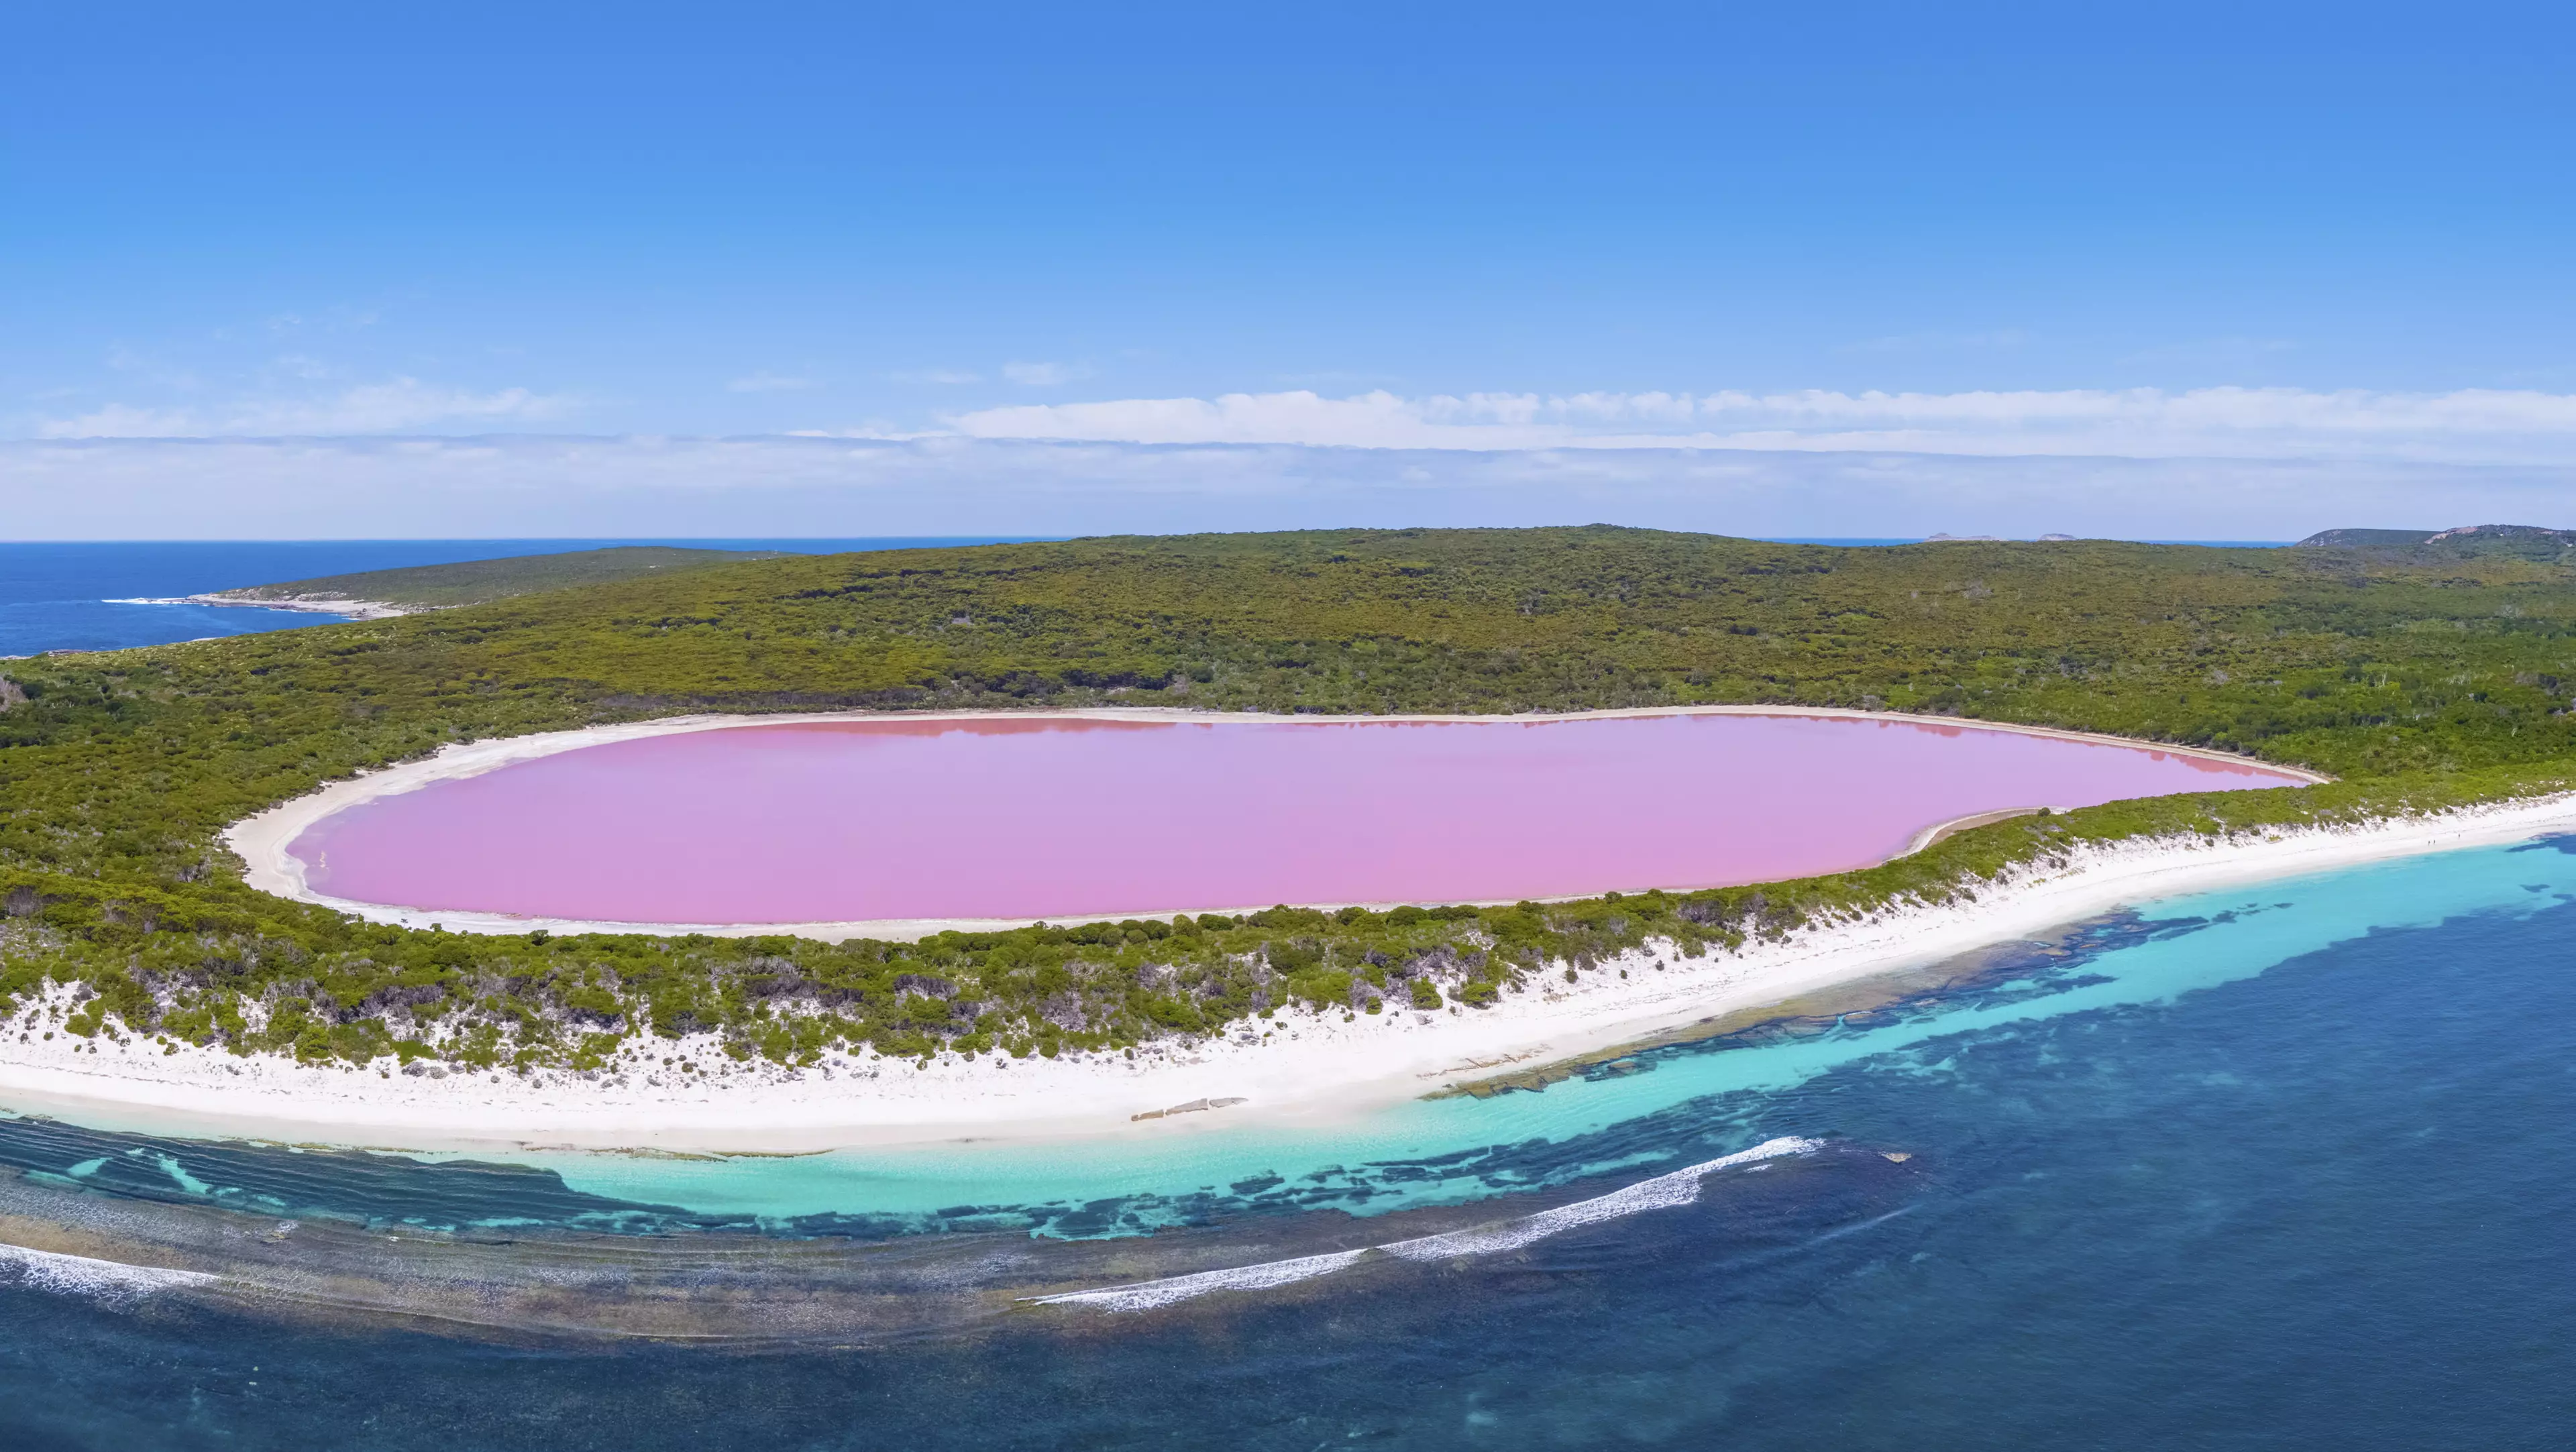 Lake Hillier is next to the dark blue waters of the Indian Ocean (